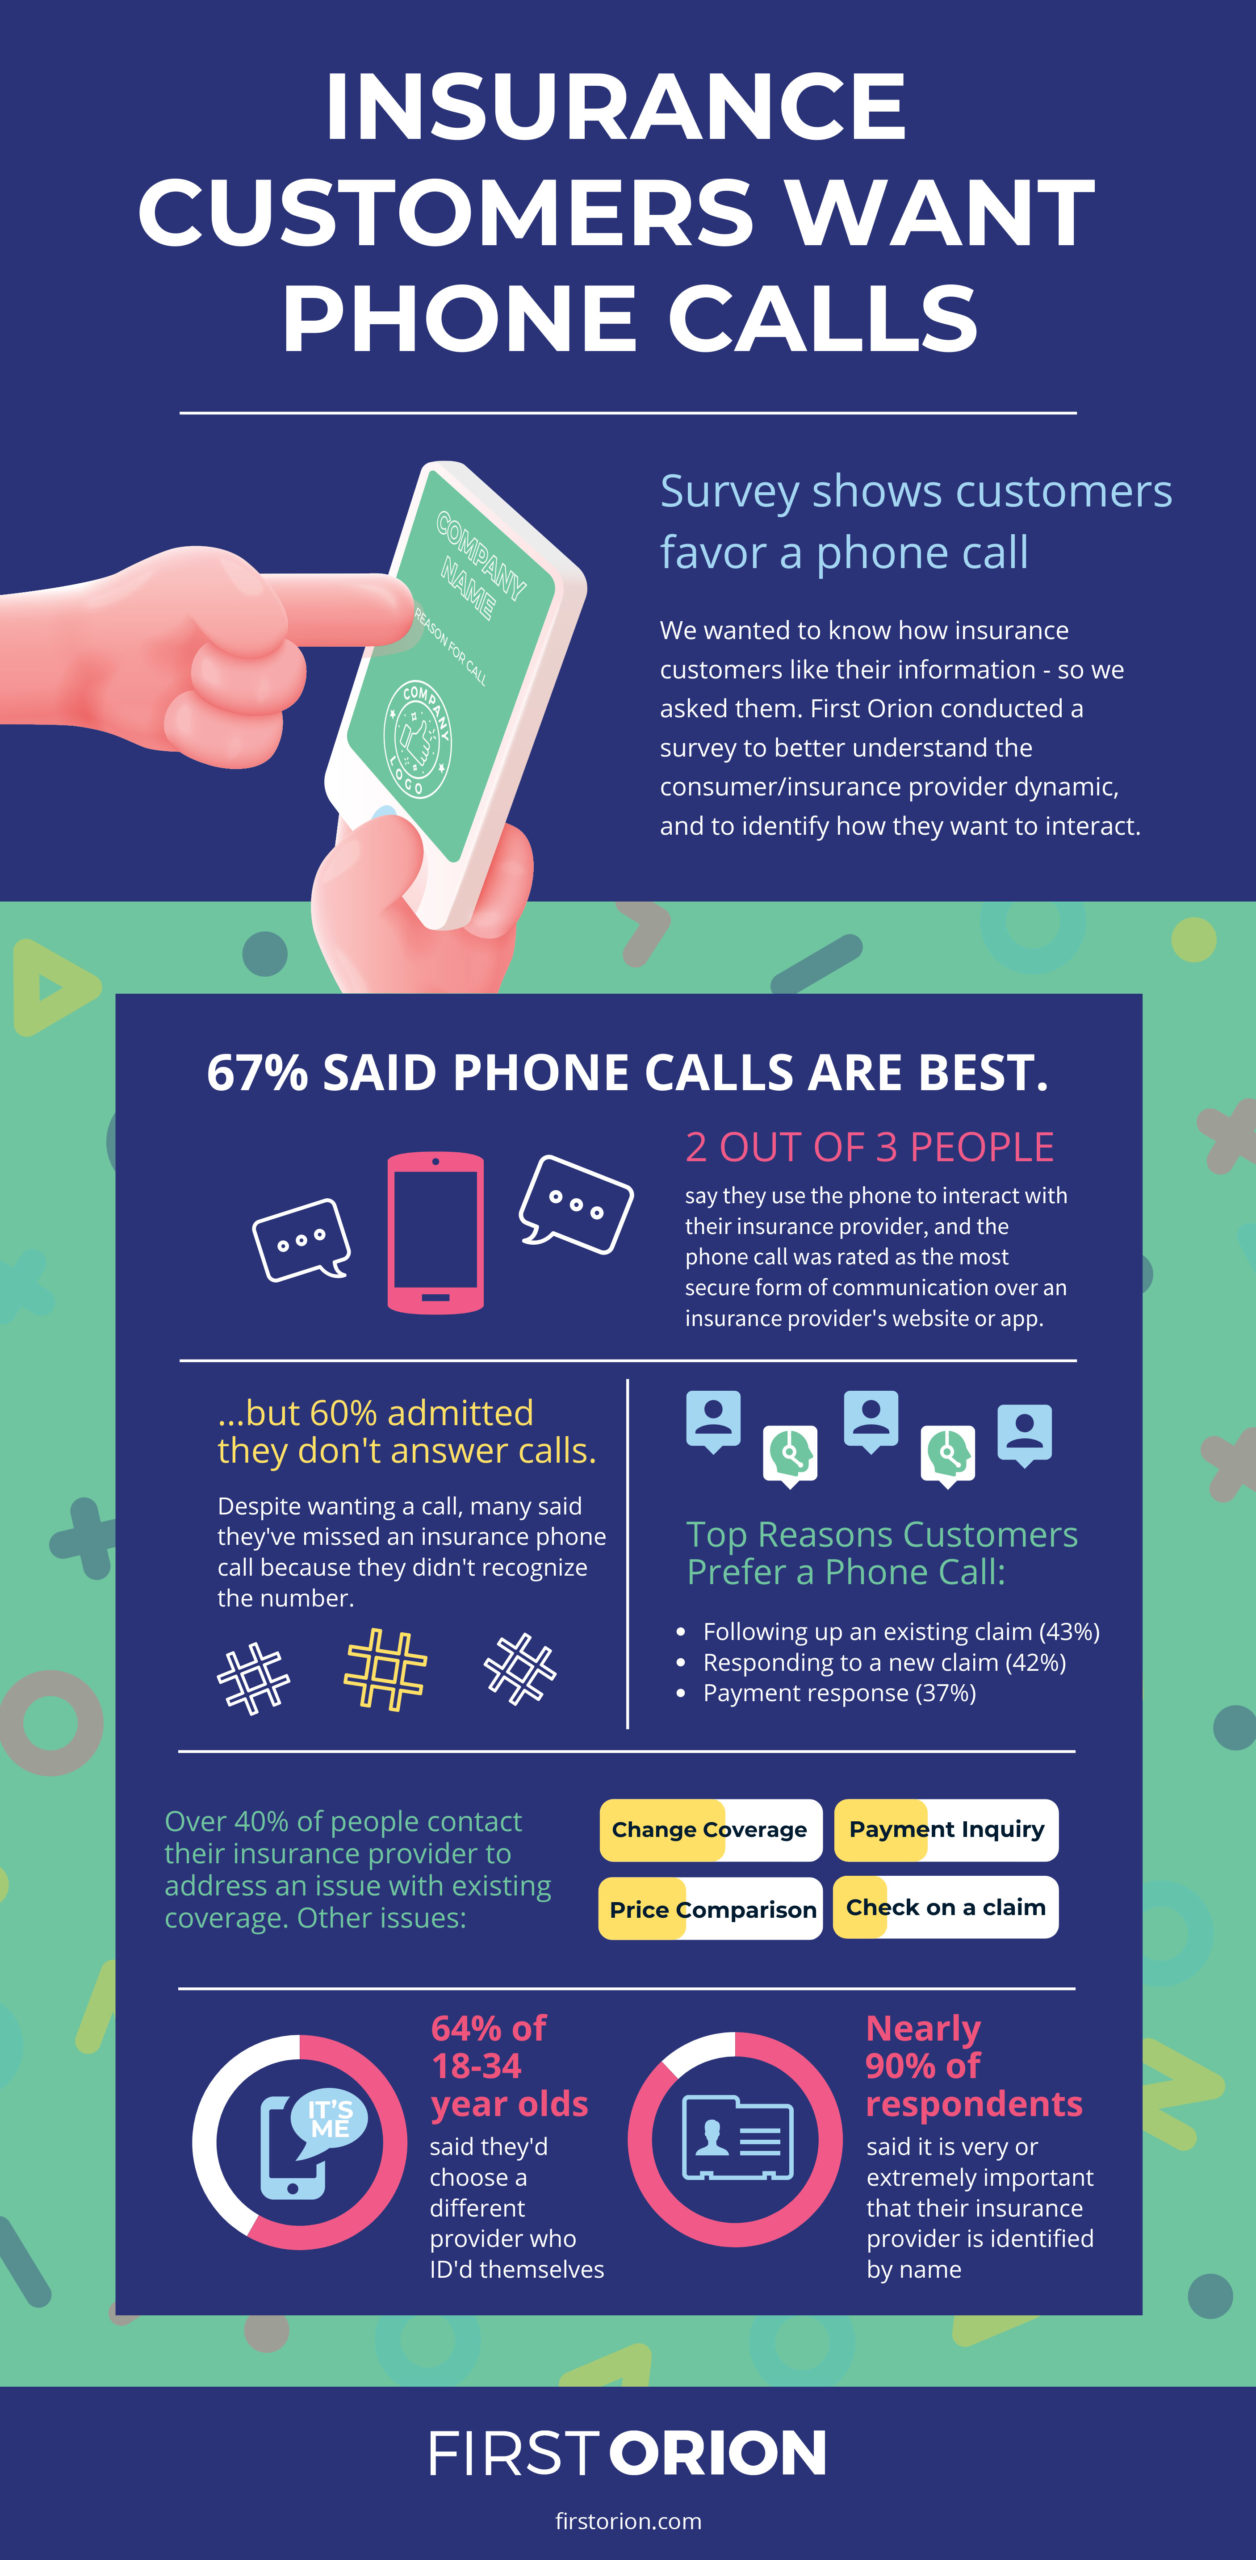 Insurance Customers Want Phone Calls: Infographic